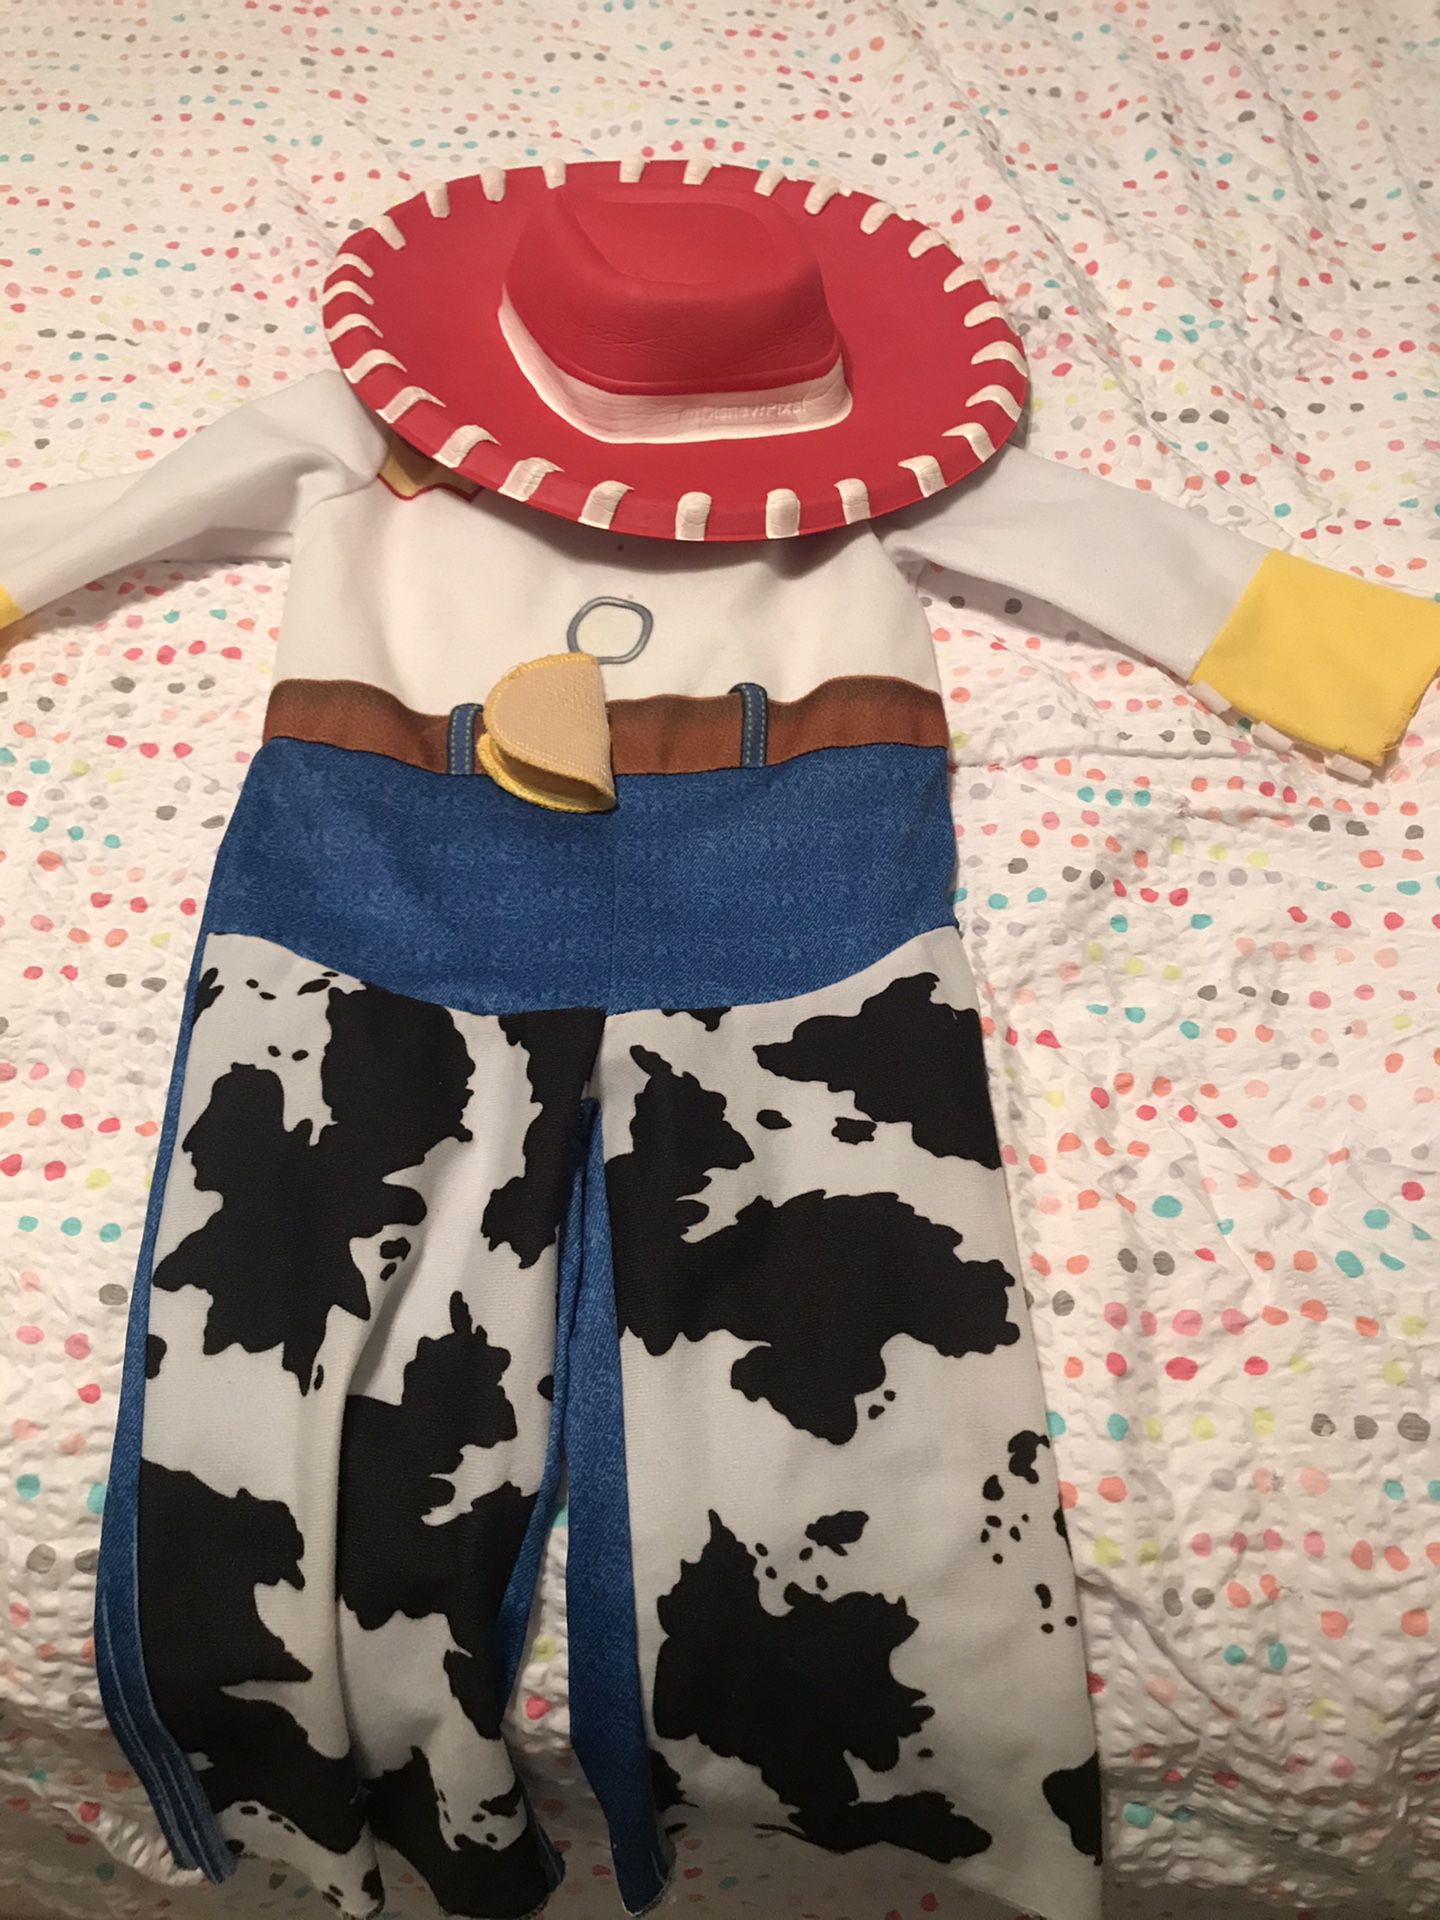 2-3t Jessie costume from toy story